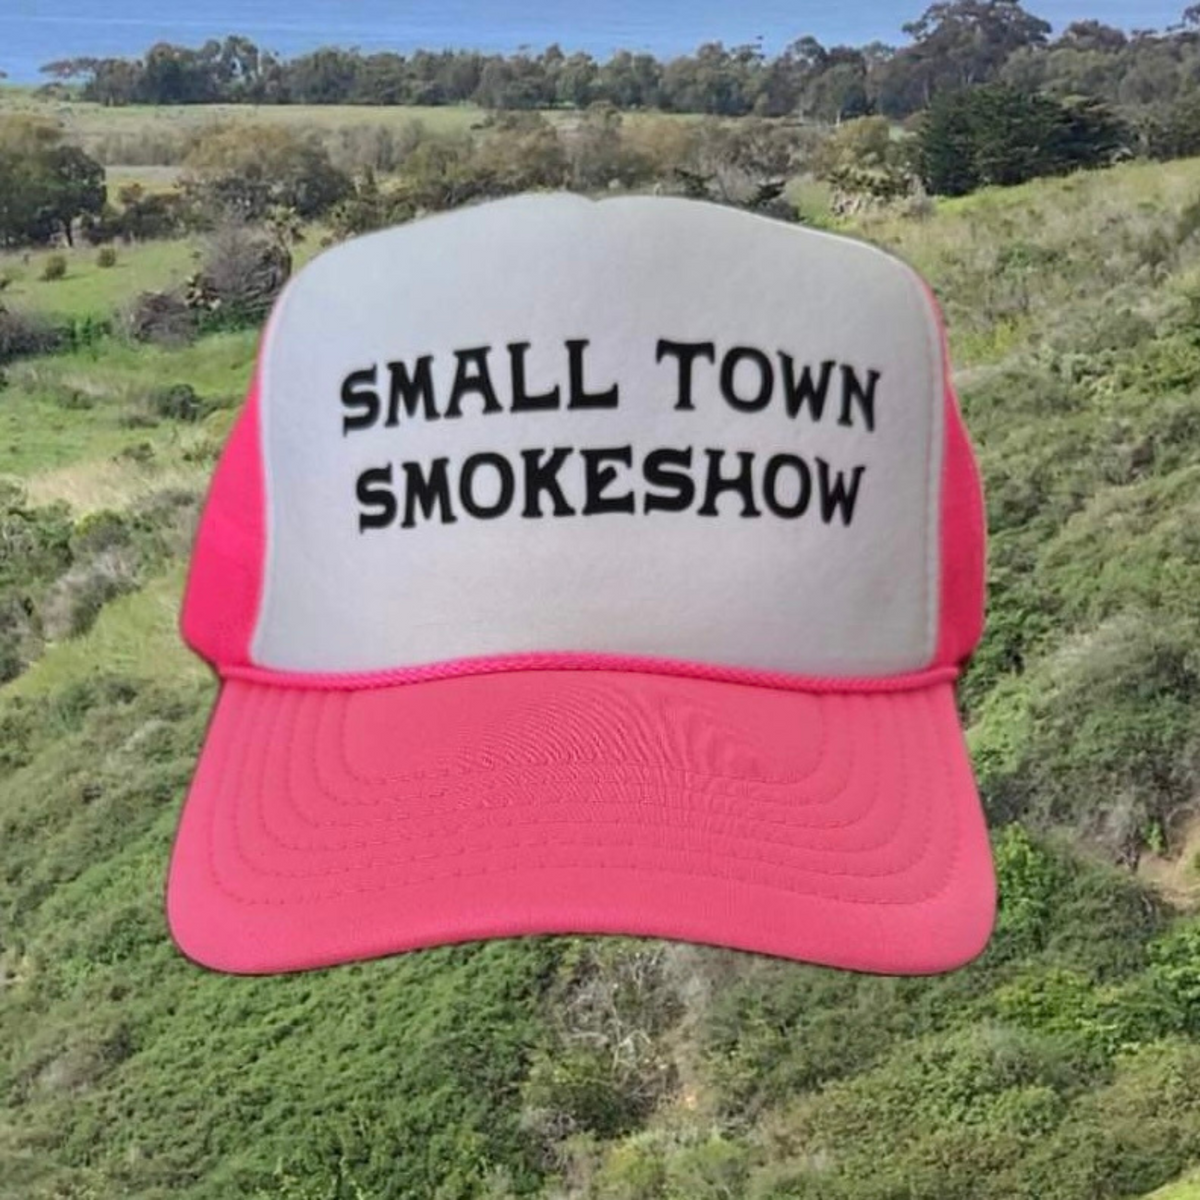 Small Town Smokeshow Trucker Hat | White and Pink Hat by Haute Sheet